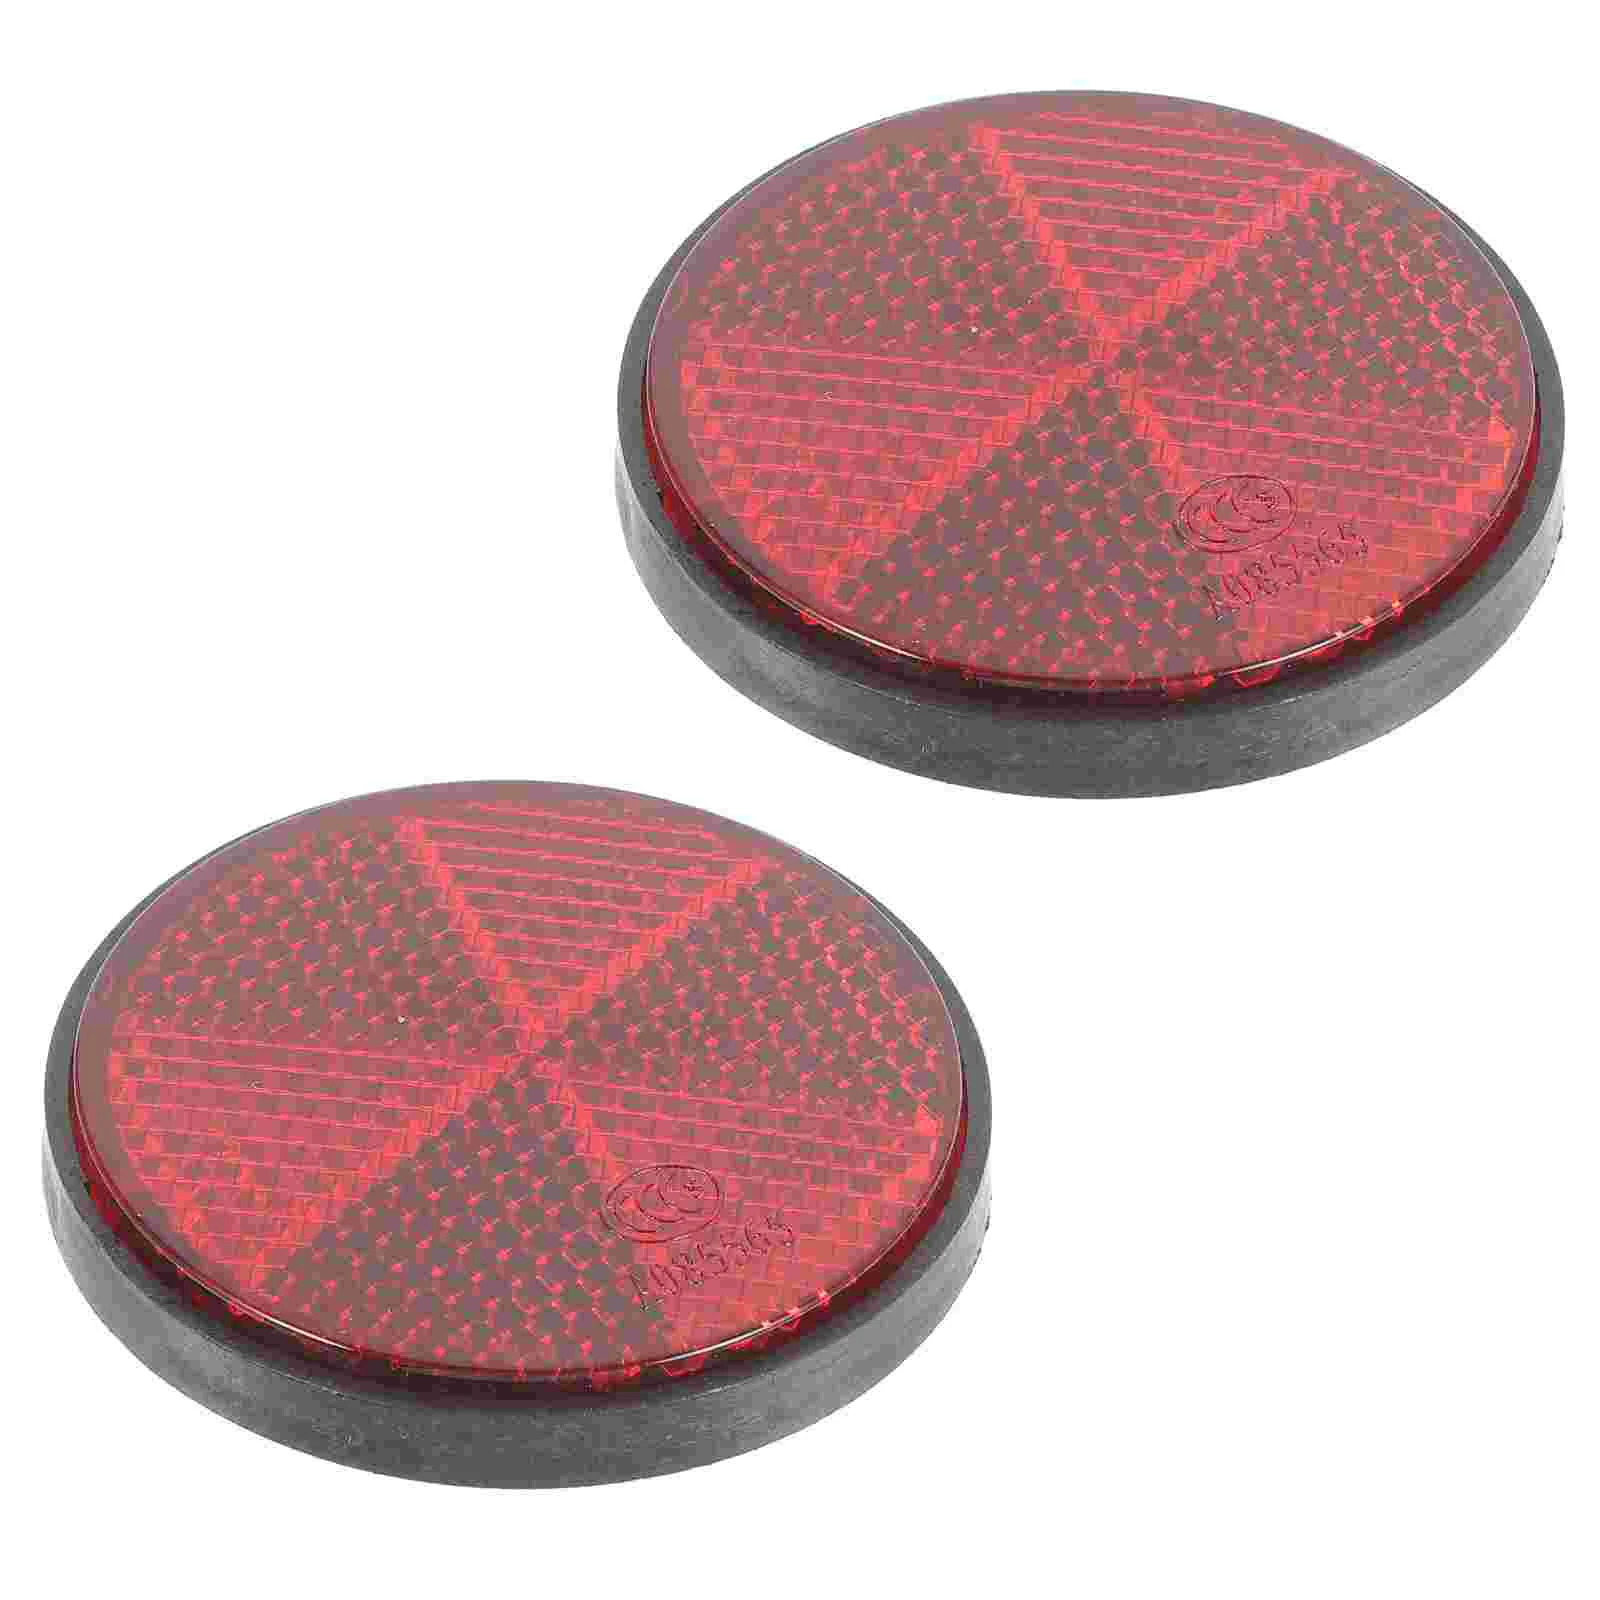 

2 Pcs Plastic Round Reflective Warning Reflector Fits for Car Motorcycle Motor Bikes Bicycles ATV Dirt Bike (Red)